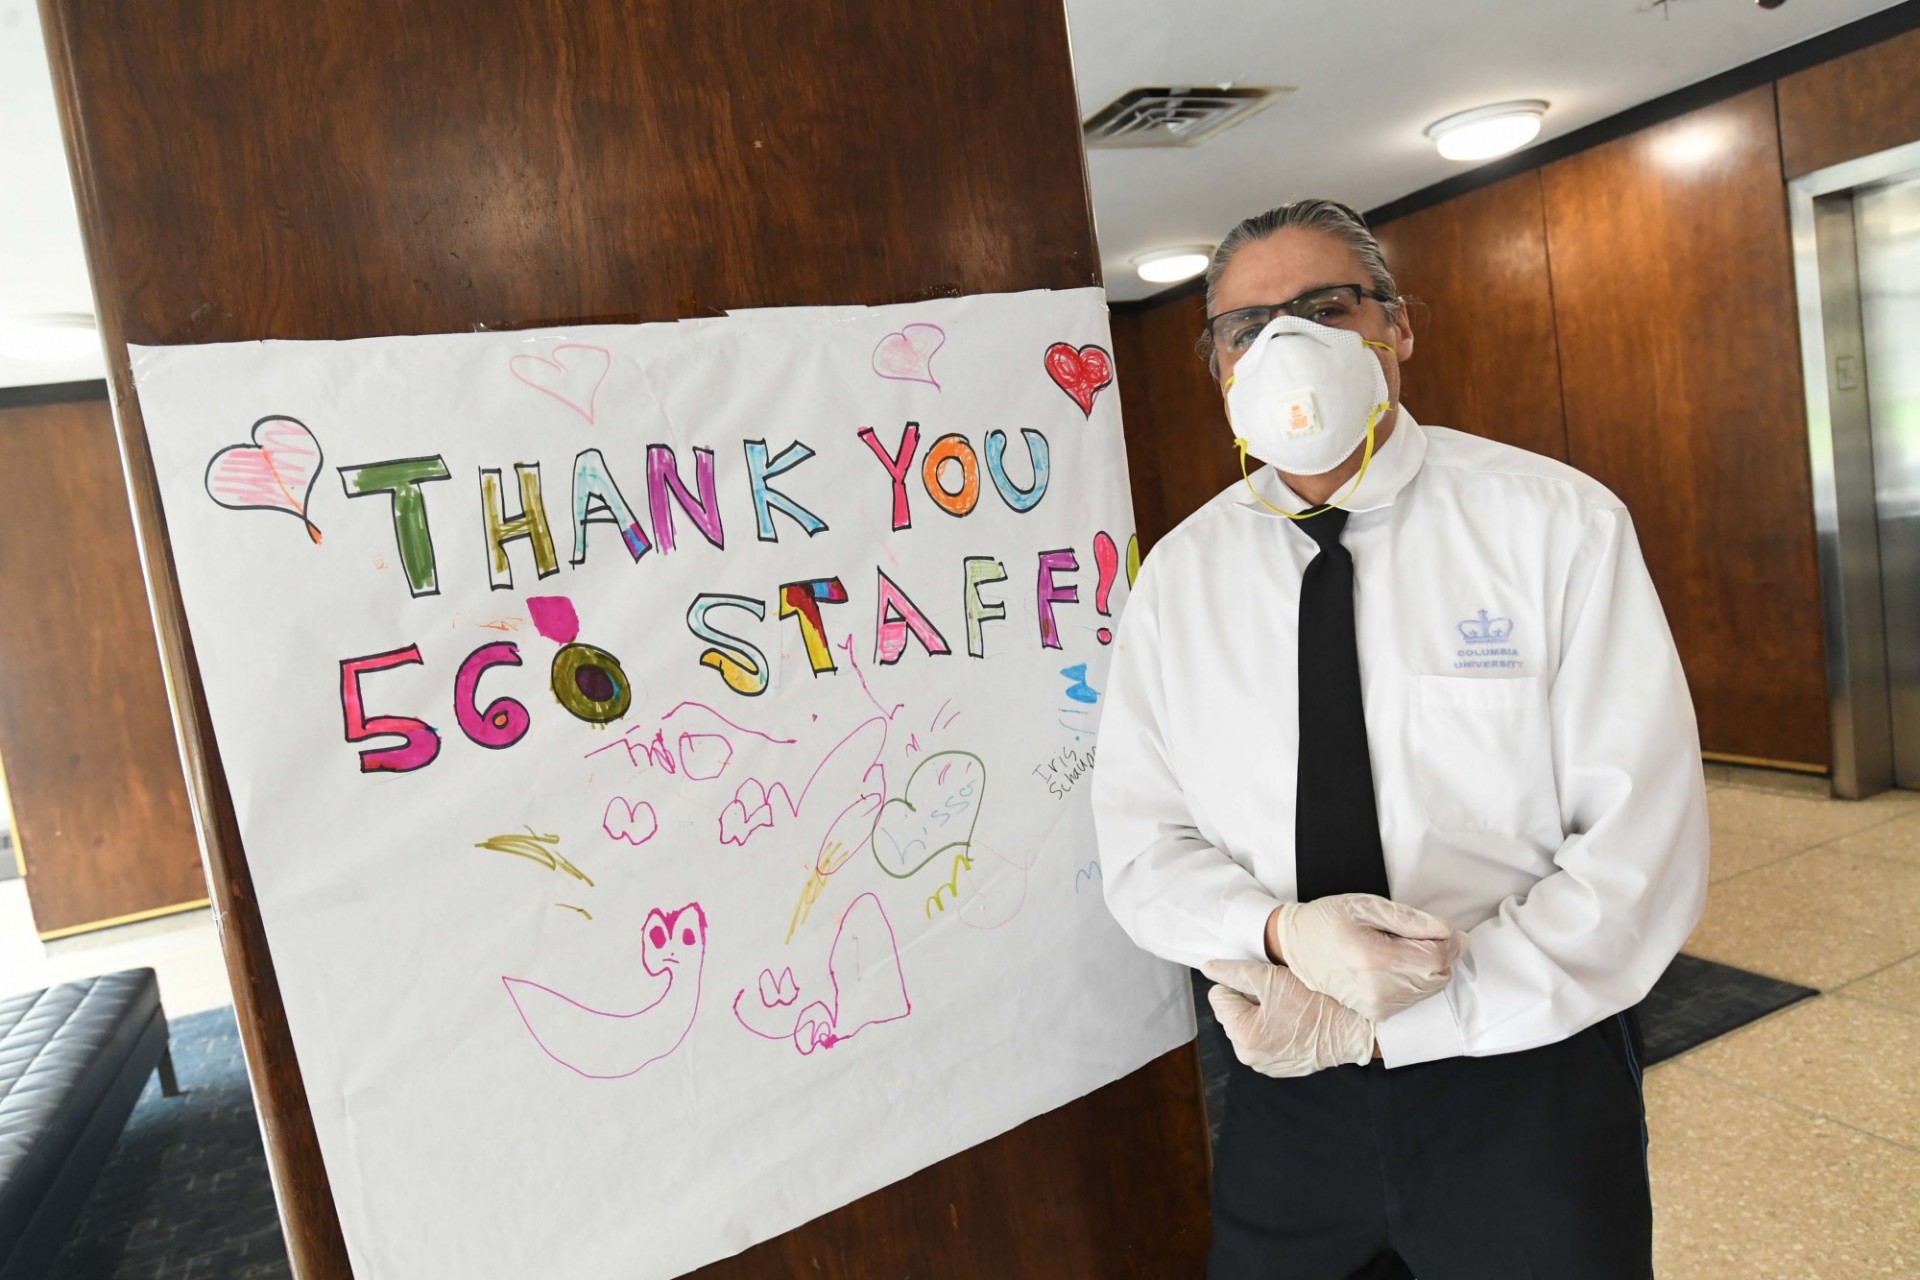 A doorman in a white button-down shirt and black tie stands in the lobby of a residential building next to a homemade sign that says, "Thank you 560 Staff!"